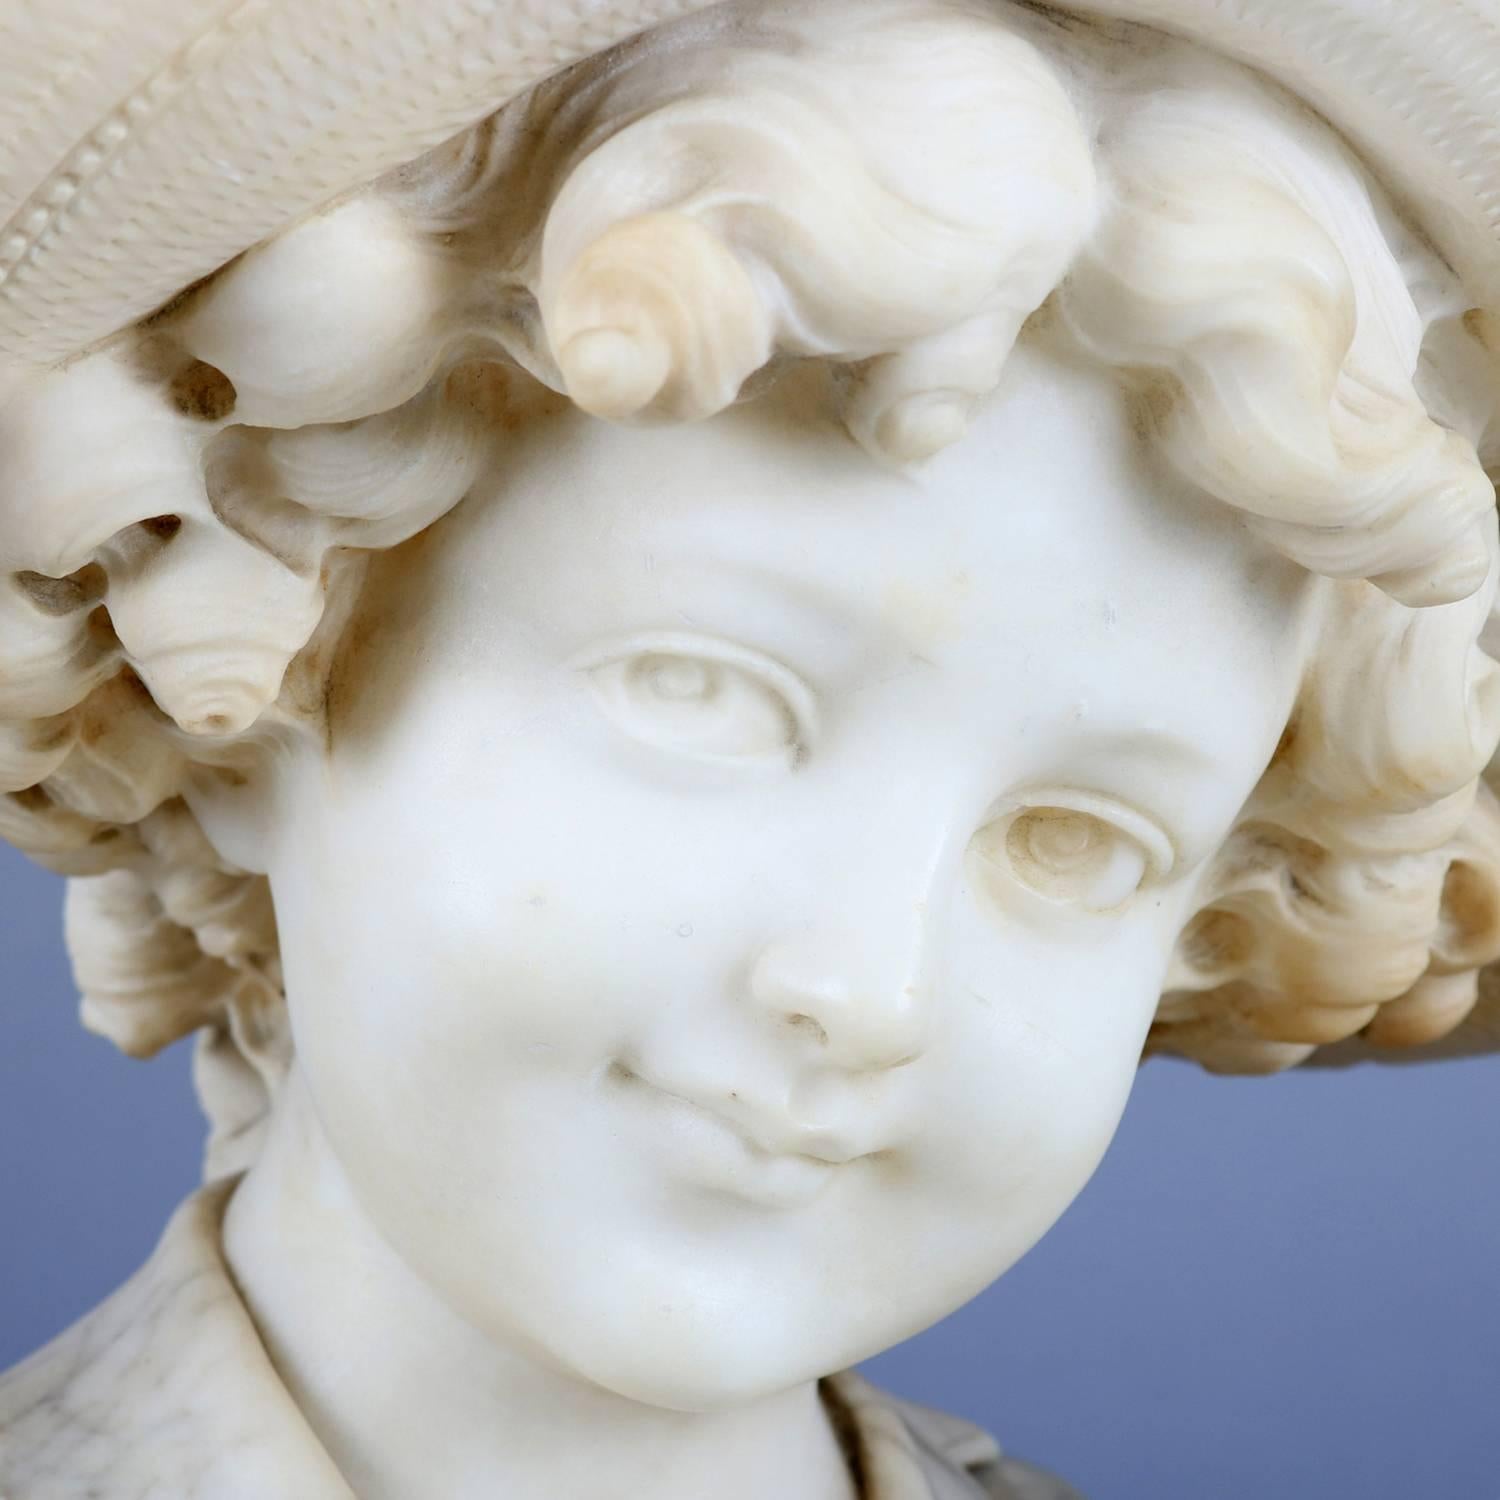 Antique Italian carved marble portrait sculpture depicts bust of a boy with his gambusi (musical guitar-like string instrument), signed on back A. Ciprianin, circa 1880

Measures: 16